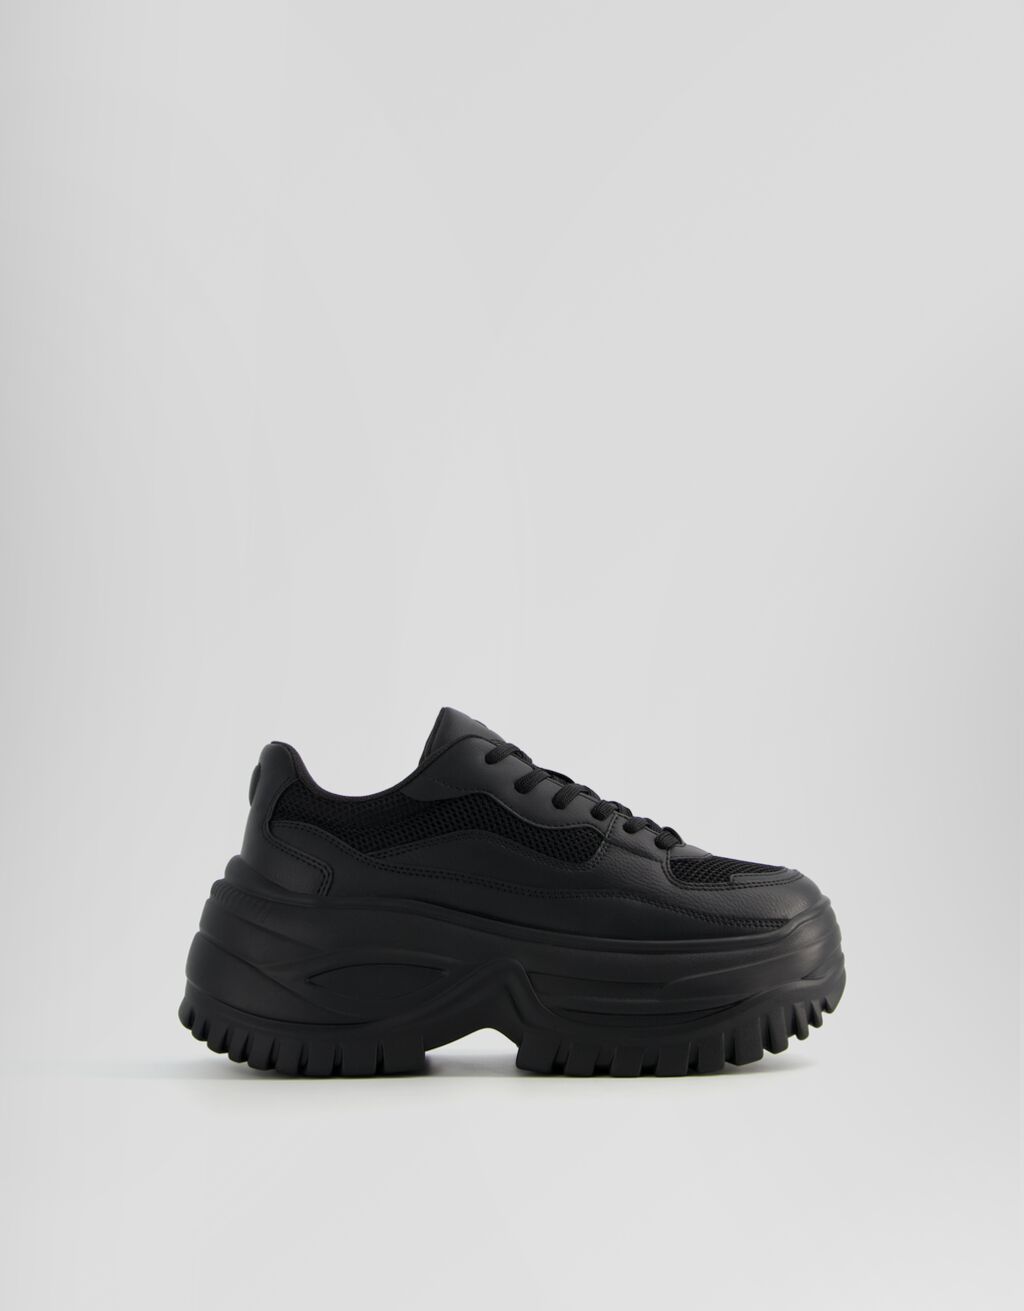 Contrast chunky sole mesh trainers